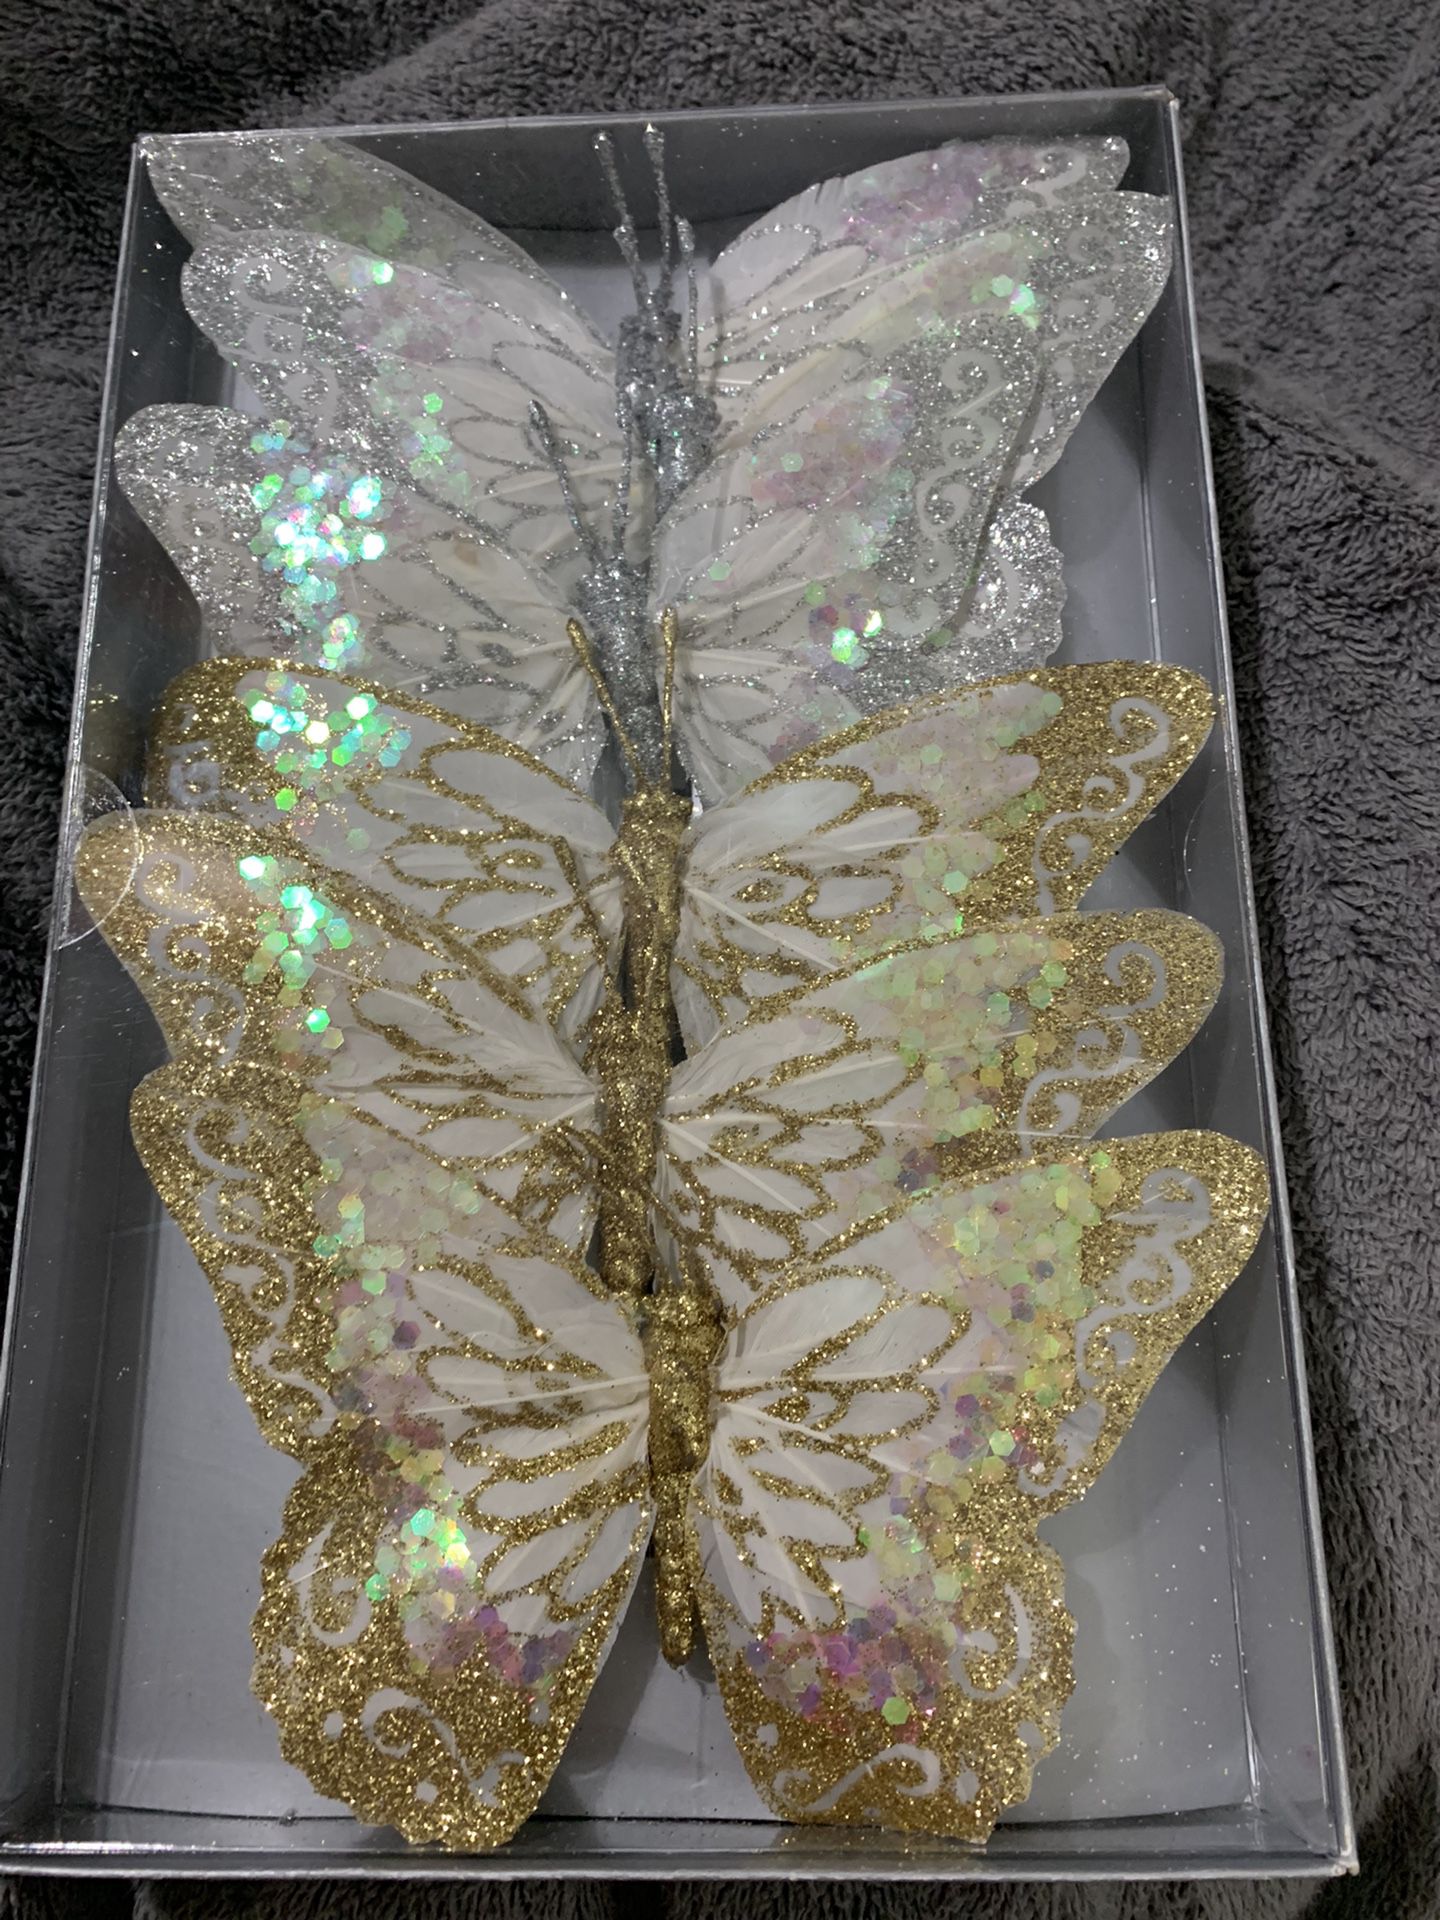 Clipped Butterflies For Decorations 